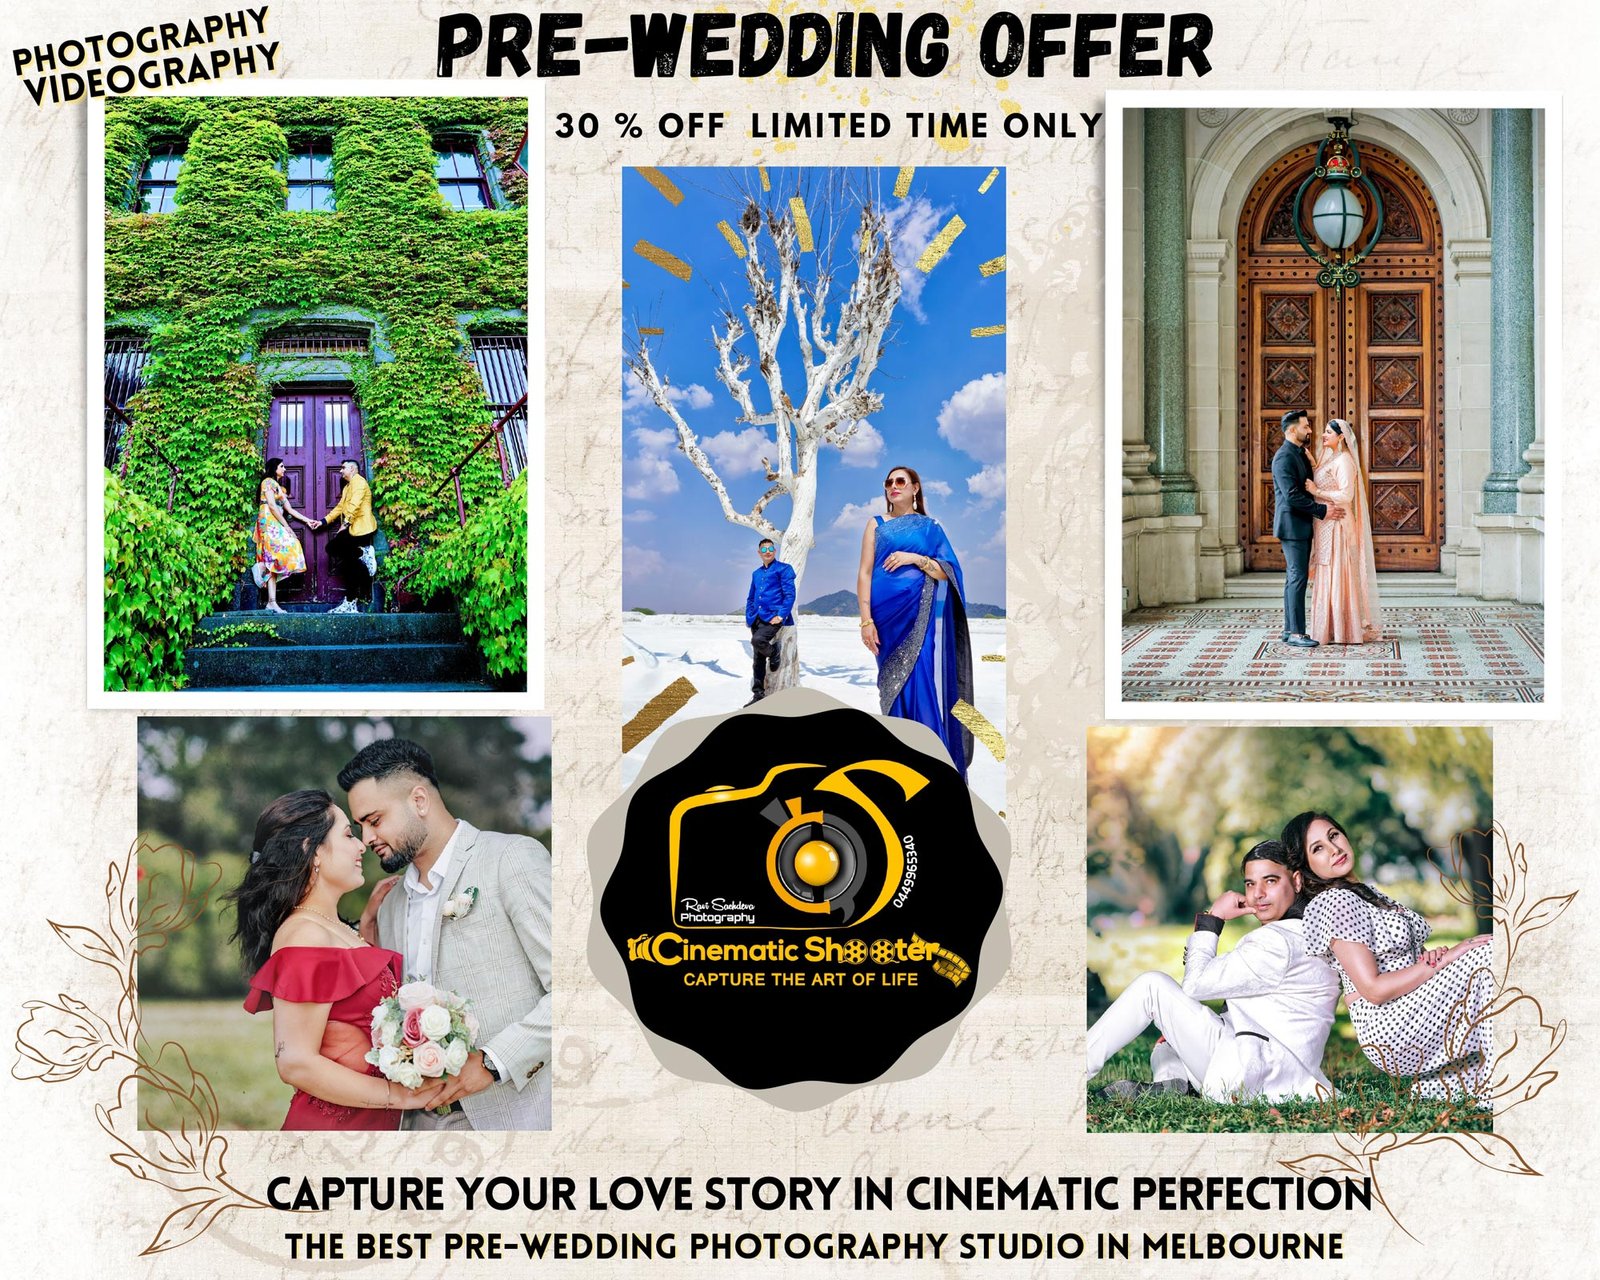 Pre-Wedding Photography and Videography in Melbourne Prewedding Photoshoot Melbourne